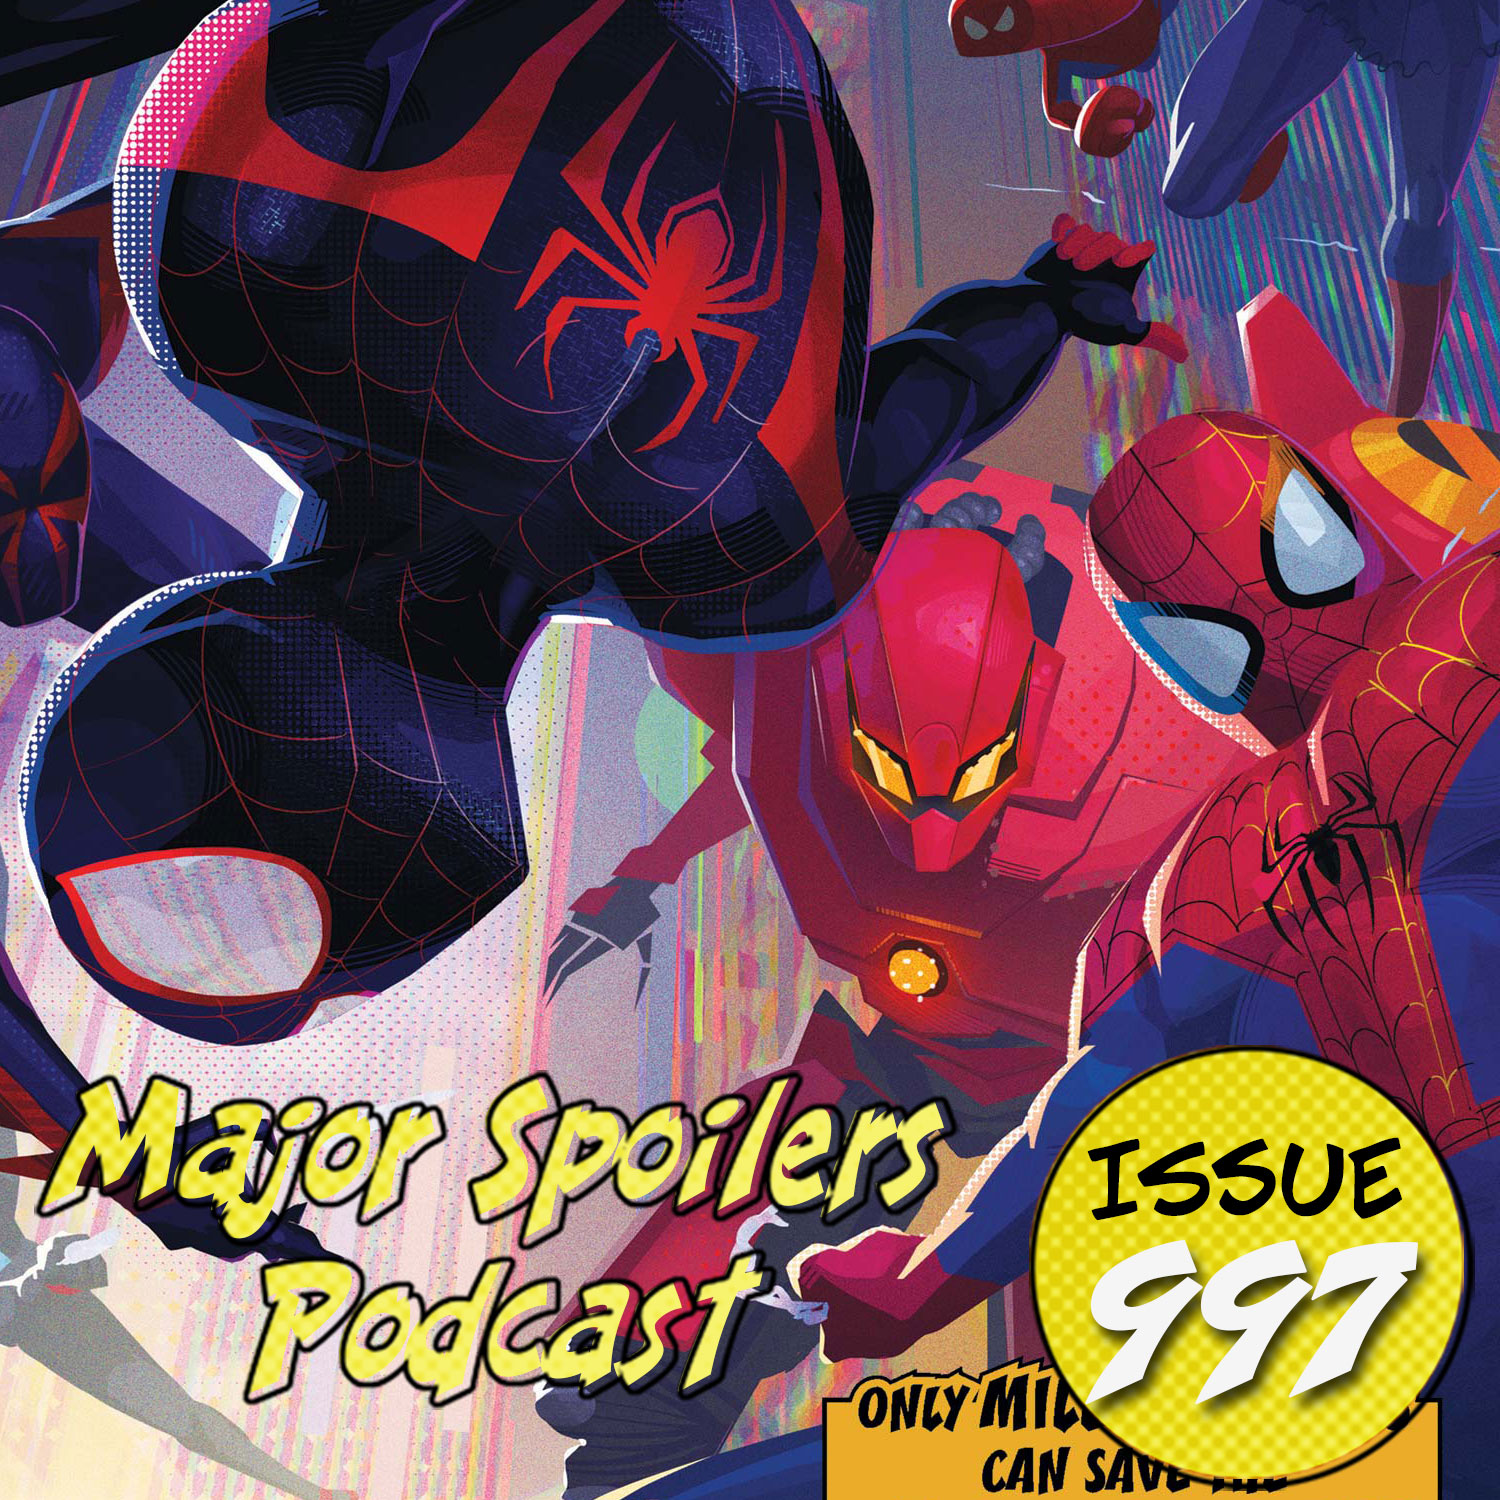 Major Spoilers Podcast #997: Spider-Verse